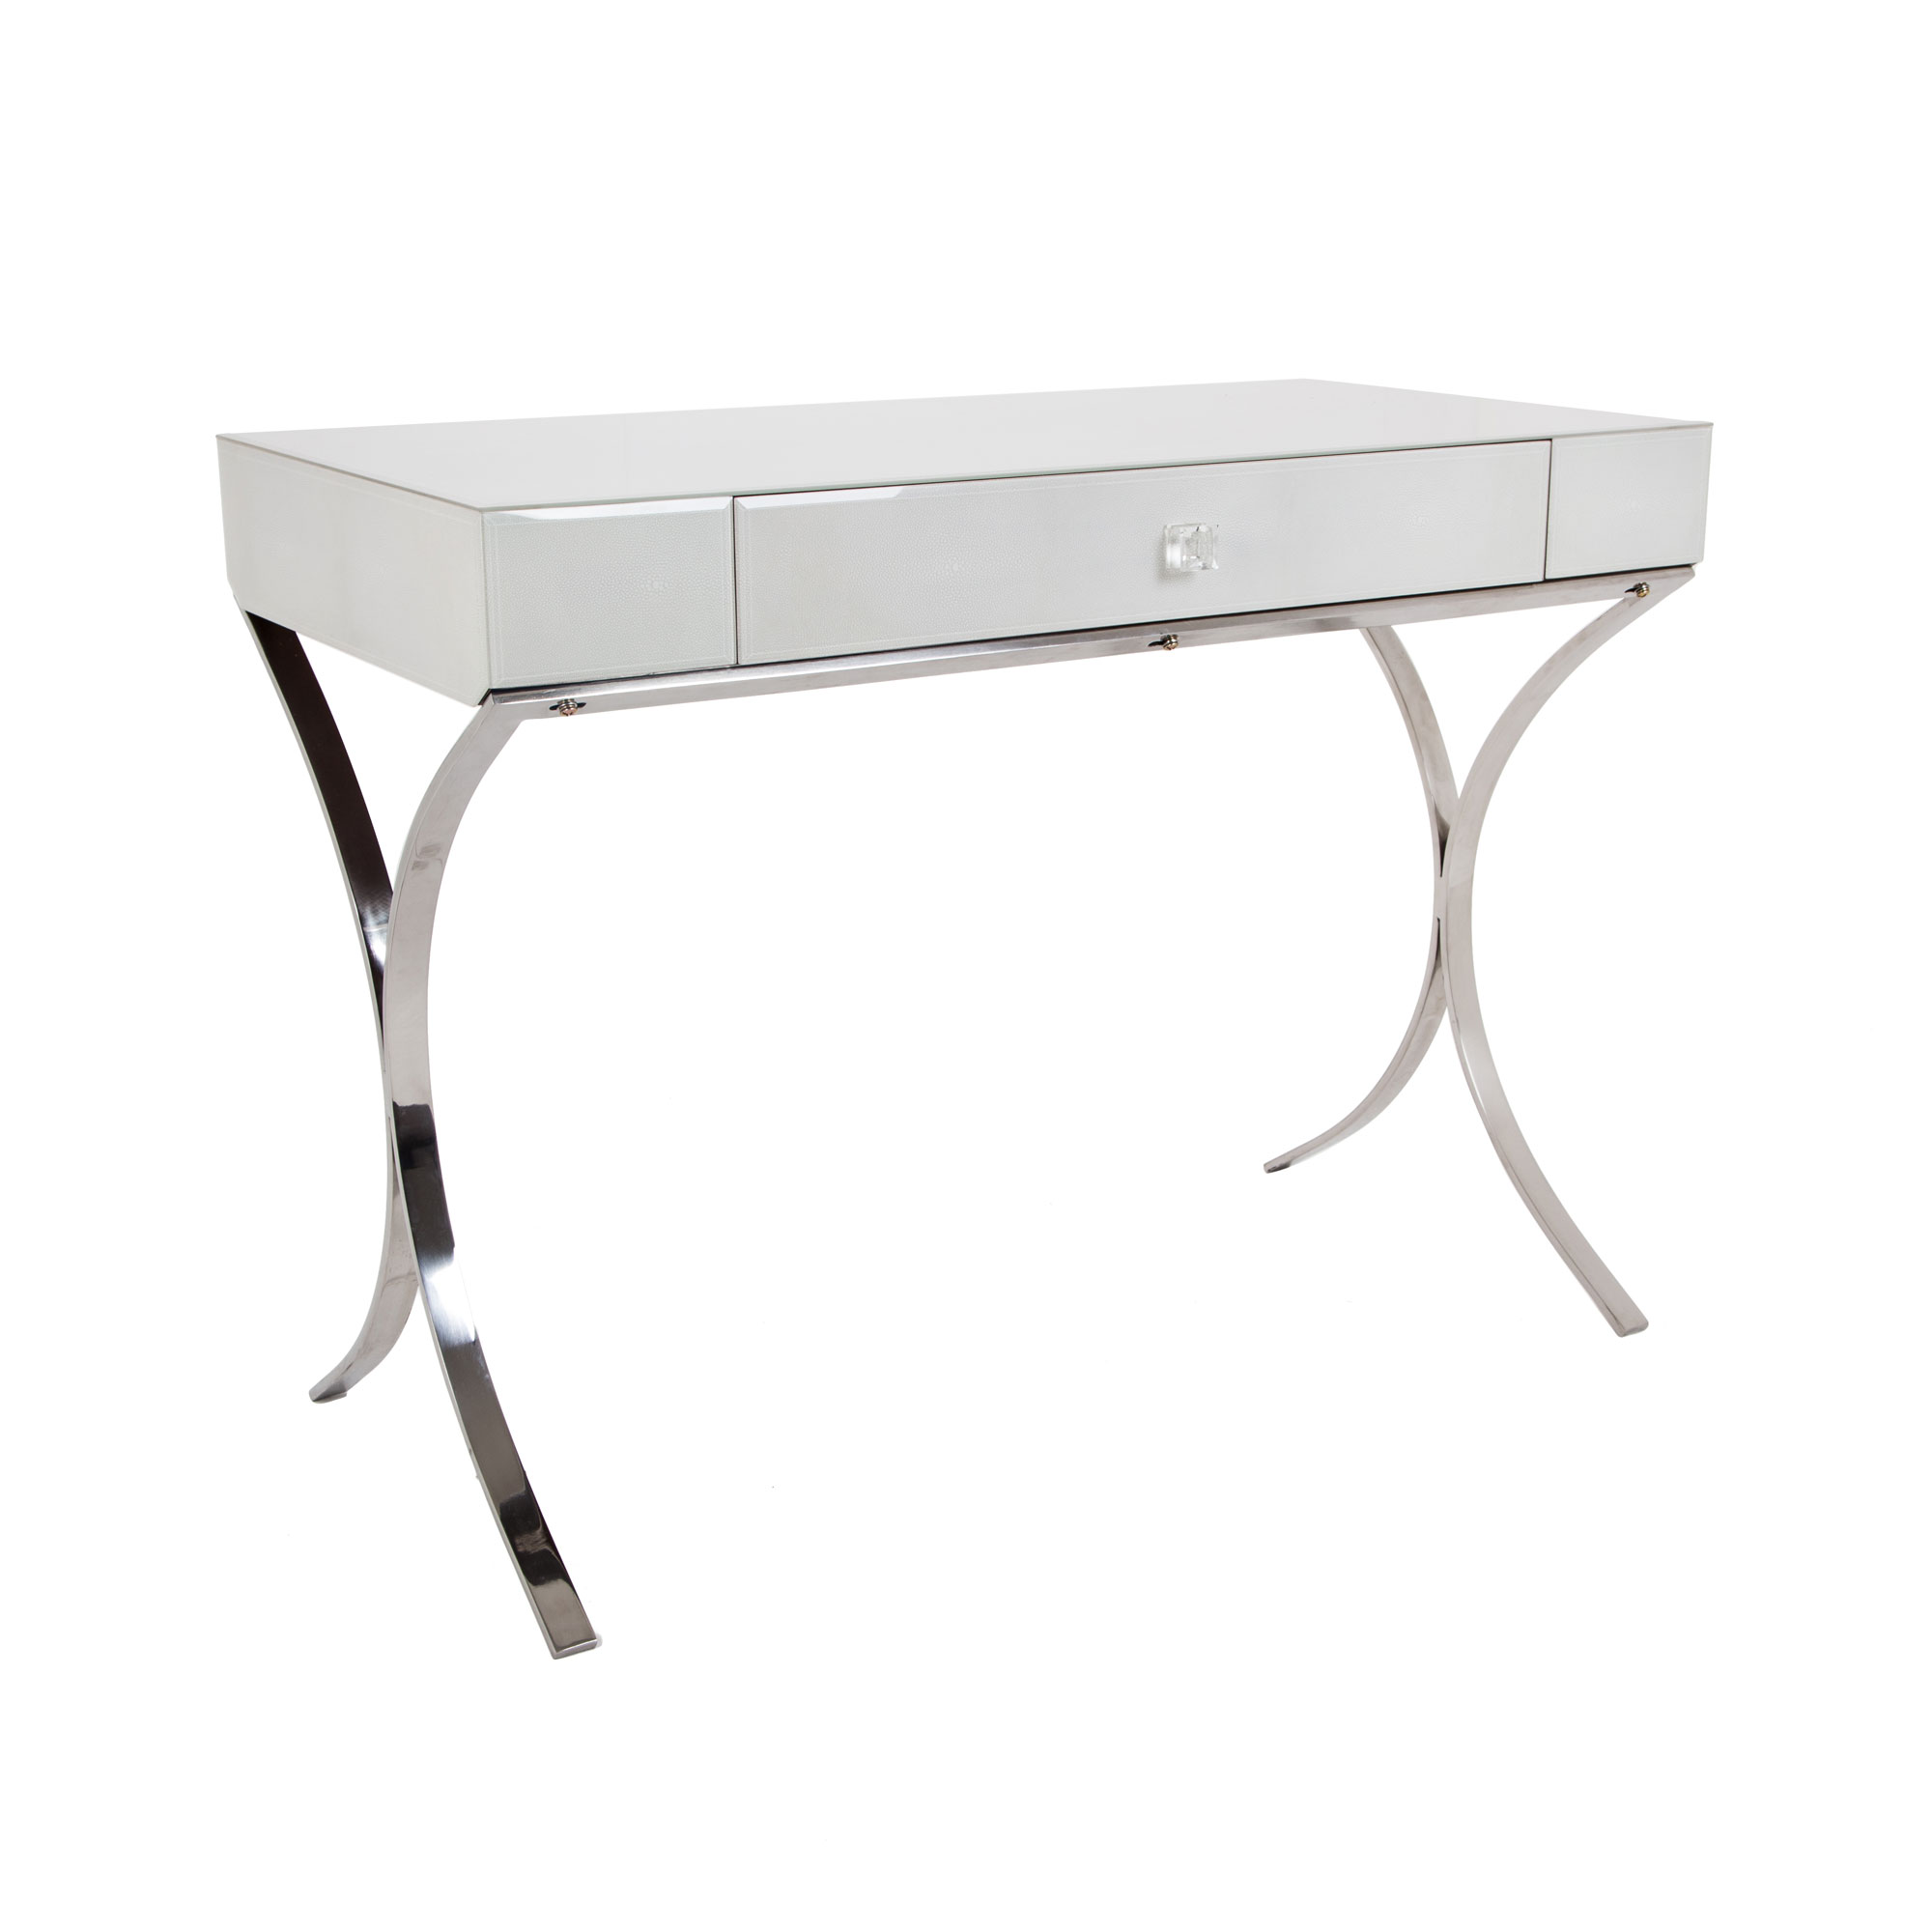 Iced dressing table with single drawer & stainless steel finish